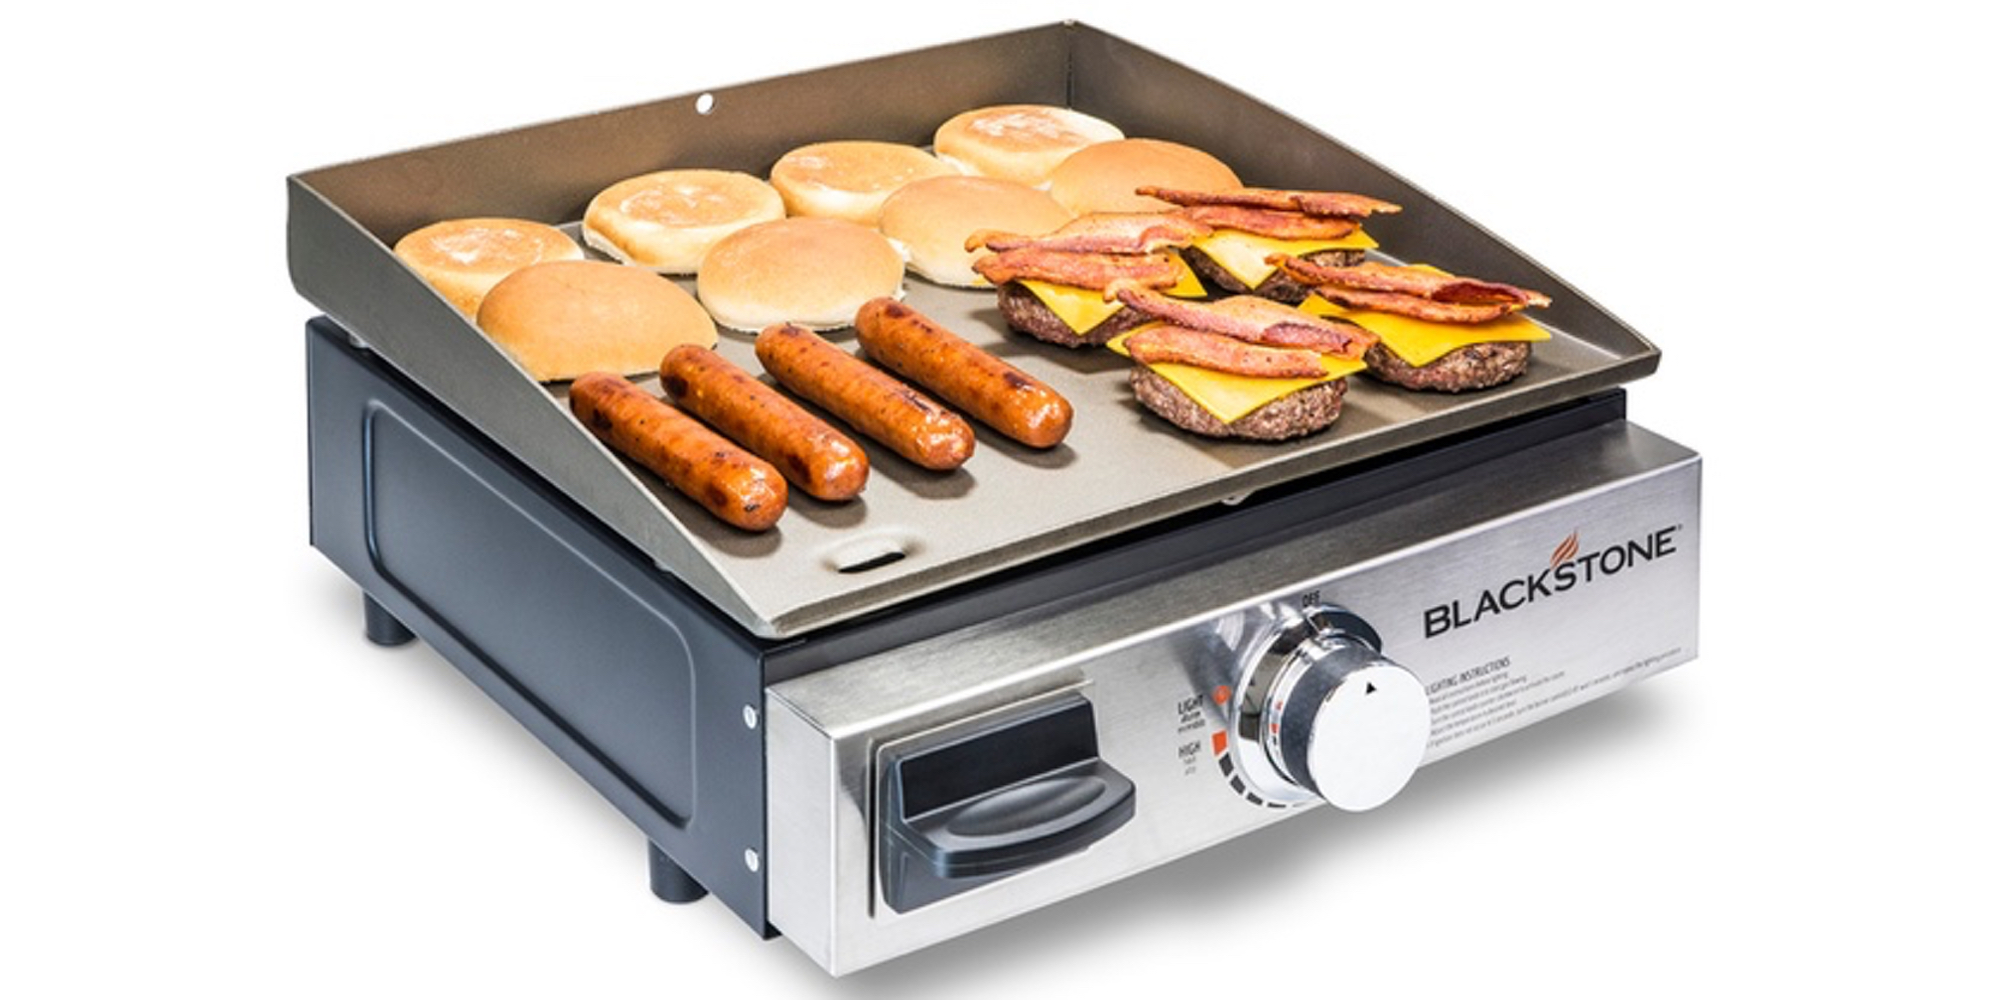 blackstone-gas-griddle-is-the-perfect-way-to-cook-on-the-go-for-51-50